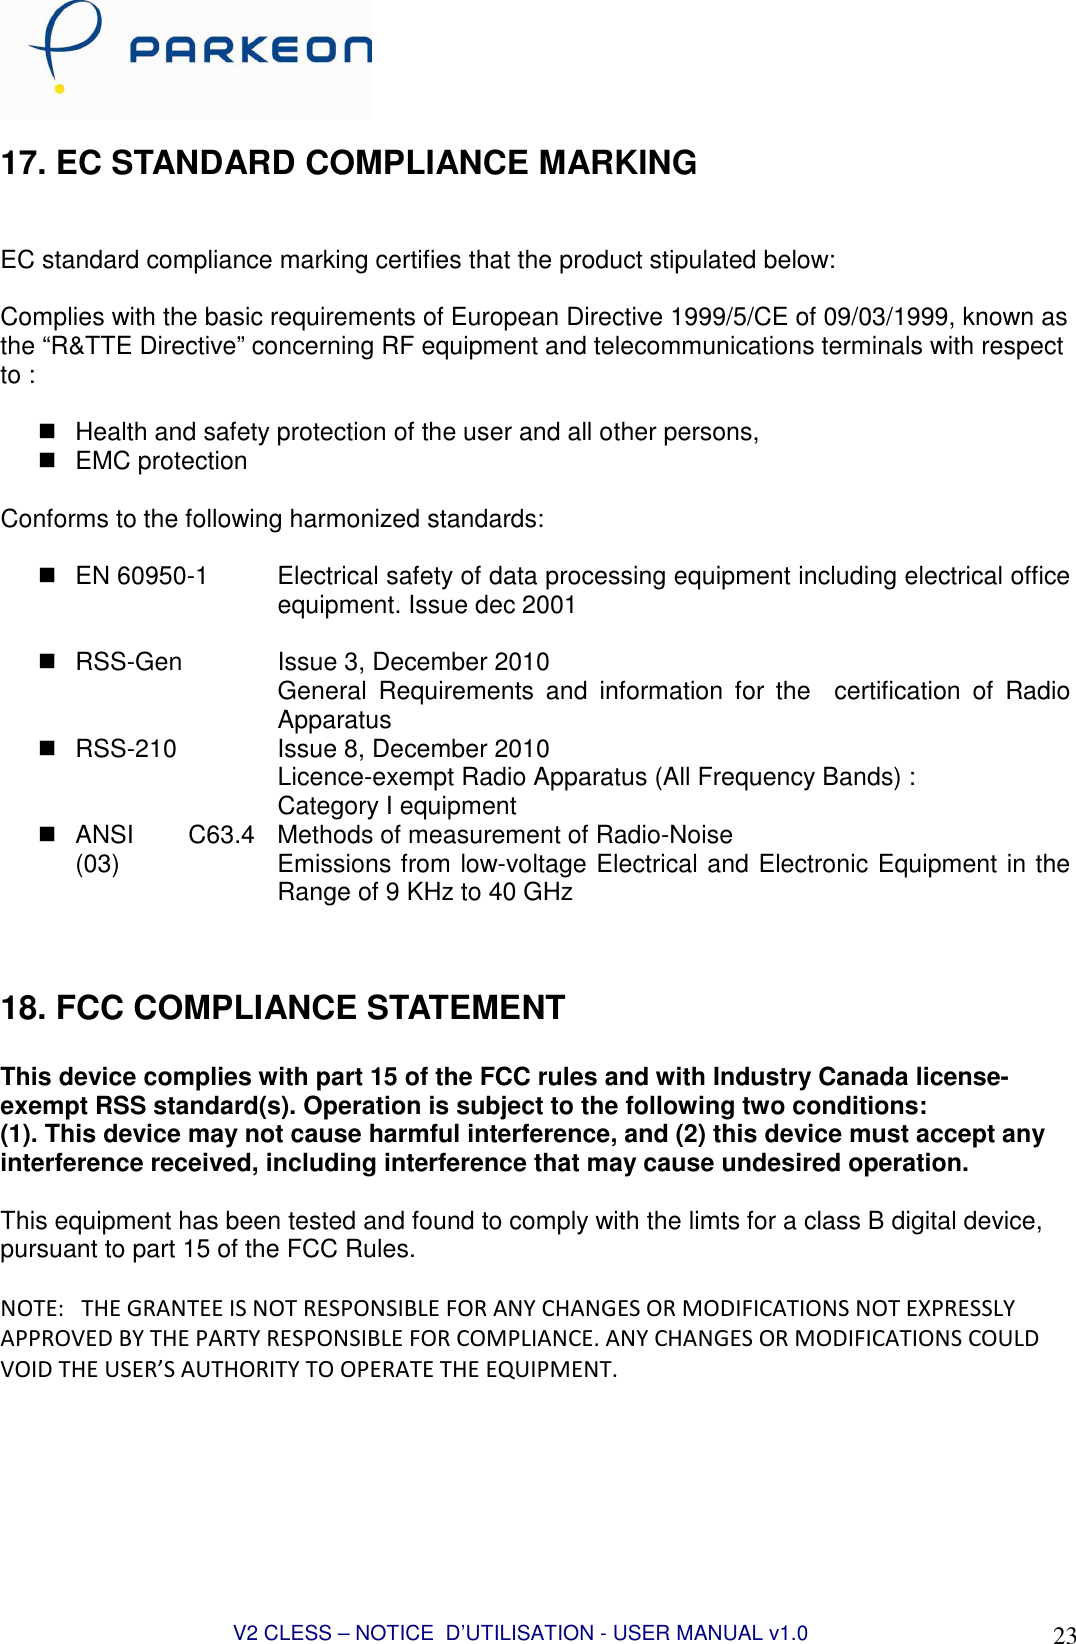  V2 CLESS – NOTICE  D’UTILISATION - USER MANUAL v1.0 23 17. EC STANDARD COMPLIANCE MARKING   EC standard compliance marking certifies that the product stipulated below:  Complies with the basic requirements of European Directive 1999/5/CE of 09/03/1999, known as the “R&amp;TTE Directive” concerning RF equipment and telecommunications terminals with respect to :    Health and safety protection of the user and all other persons,   EMC protection  Conforms to the following harmonized standards:    EN 60950-1  Electrical safety of data processing equipment including electrical office equipment. Issue dec 2001    RSS-Gen    Issue 3, December 2010 General  Requirements  and  information  for  the    certification  of  Radio Apparatus   RSS-210  Issue 8, December 2010 Licence-exempt Radio Apparatus (All Frequency Bands) : Category I equipment   ANSI  C63.4 (03)  Methods of measurement of Radio-Noise Emissions from low-voltage Electrical and Electronic Equipment in the Range of 9 KHz to 40 GHz   18. FCC COMPLIANCE STATEMENT  This device complies with part 15 of the FCC rules and with Industry Canada license-exempt RSS standard(s). Operation is subject to the following two conditions: (1). This device may not cause harmful interference, and (2) this device must accept any interference received, including interference that may cause undesired operation.  This equipment has been tested and found to comply with the limts for a class B digital device, pursuant to part 15 of the FCC Rules.  NOTE:   THE GRANTEE IS NOT RESPONSIBLE FOR ANY CHANGES OR MODIFICATIONS NOT EXPRESSLY APPROVED BY THE PARTY RESPONSIBLE FOR COMPLIANCE. ANY CHANGES OR MODIFICATIONS COULD VOID THE USER’S AUTHORITY TO OPERATE THE EQUIPMENT.